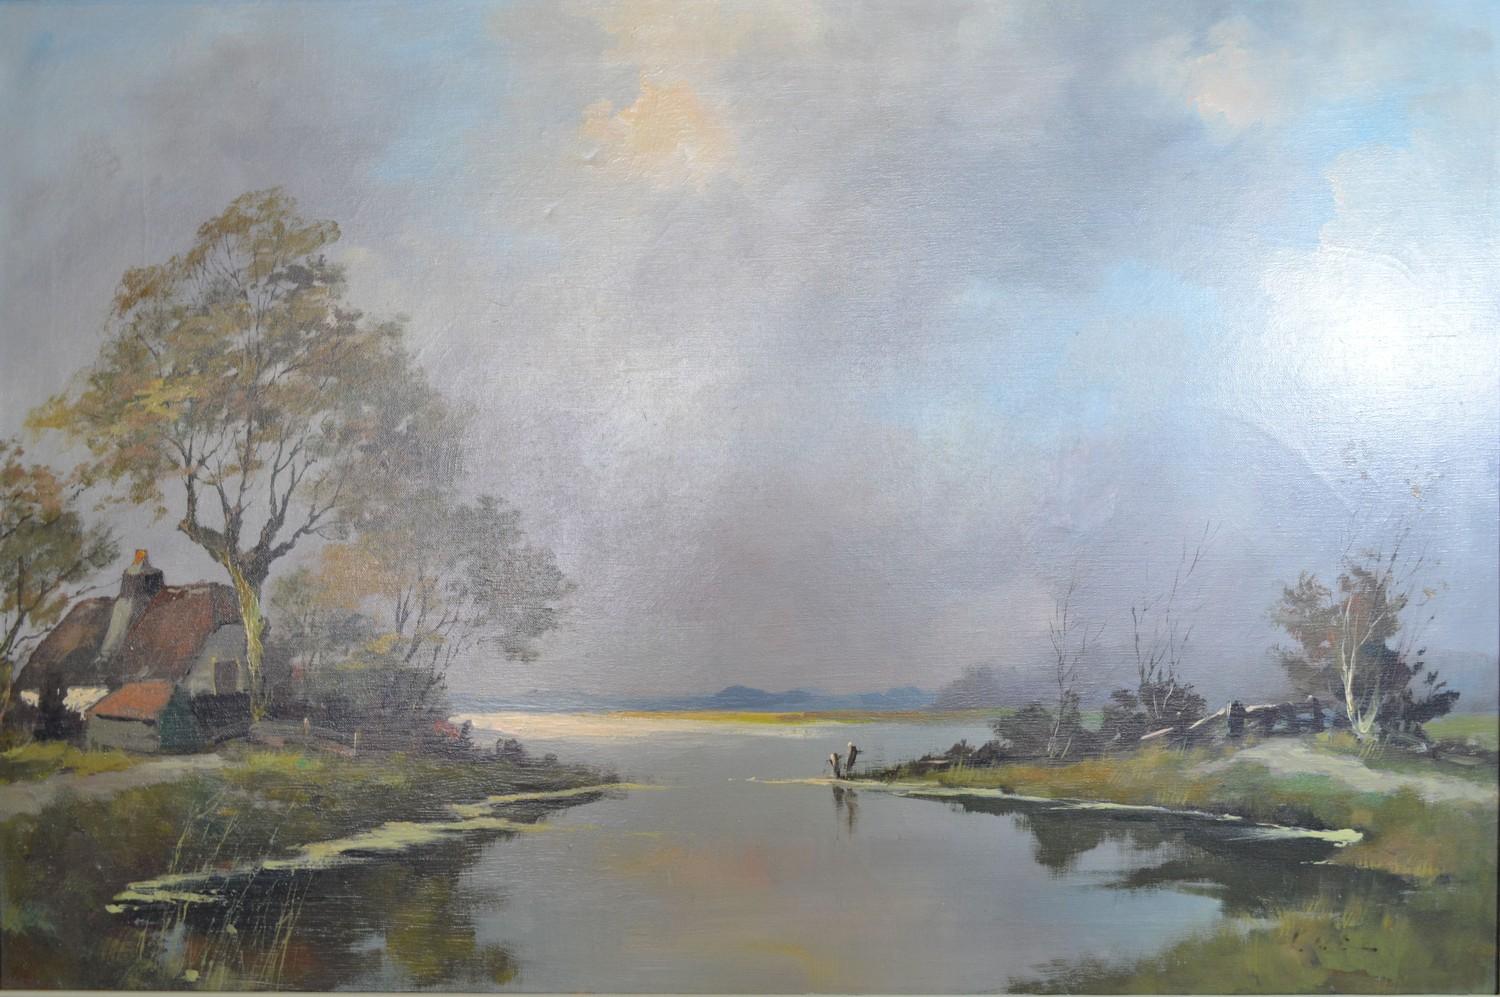 Lutz, Lake Scene with House in the Foreground, oil on canvas, 60 x 90cm together with A Herbe, a